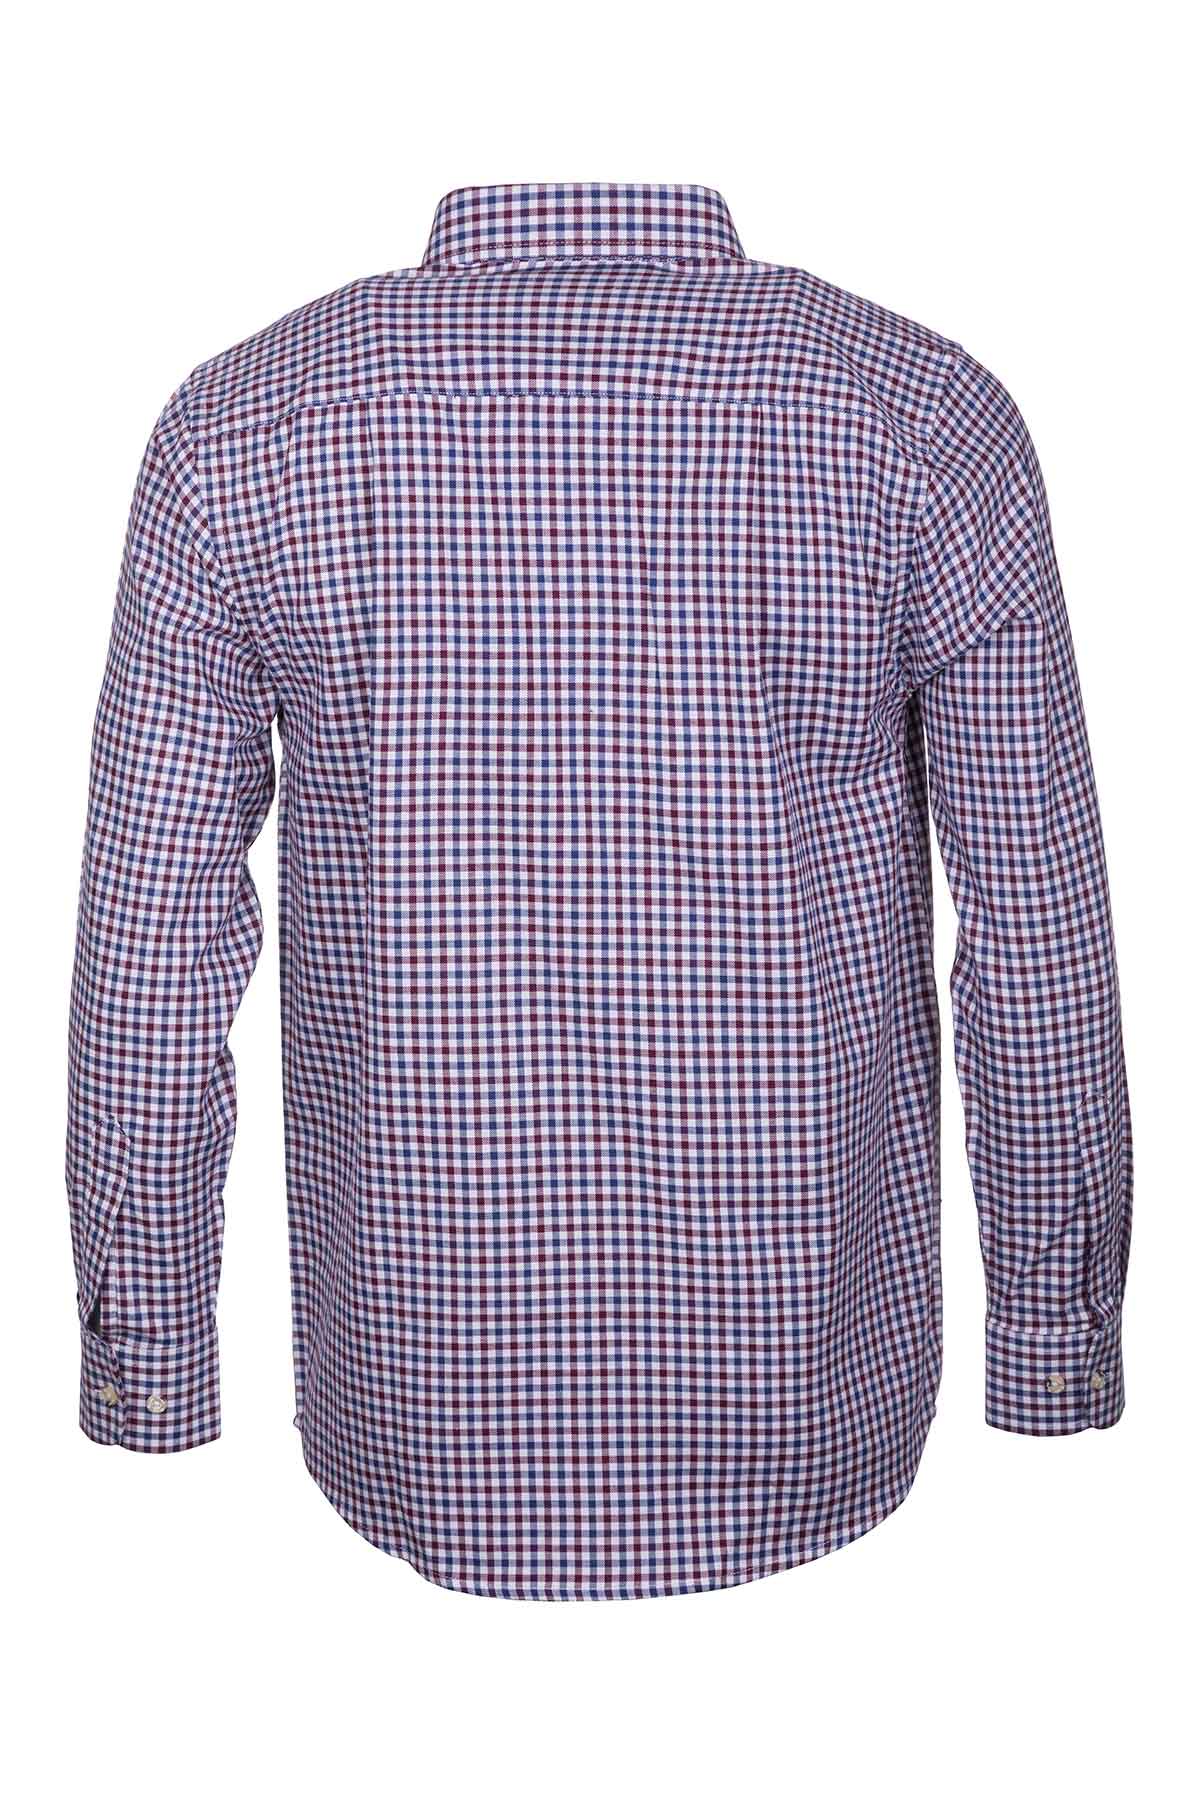 Mens Country Check Long Sleeve Shirts UK | Rydale